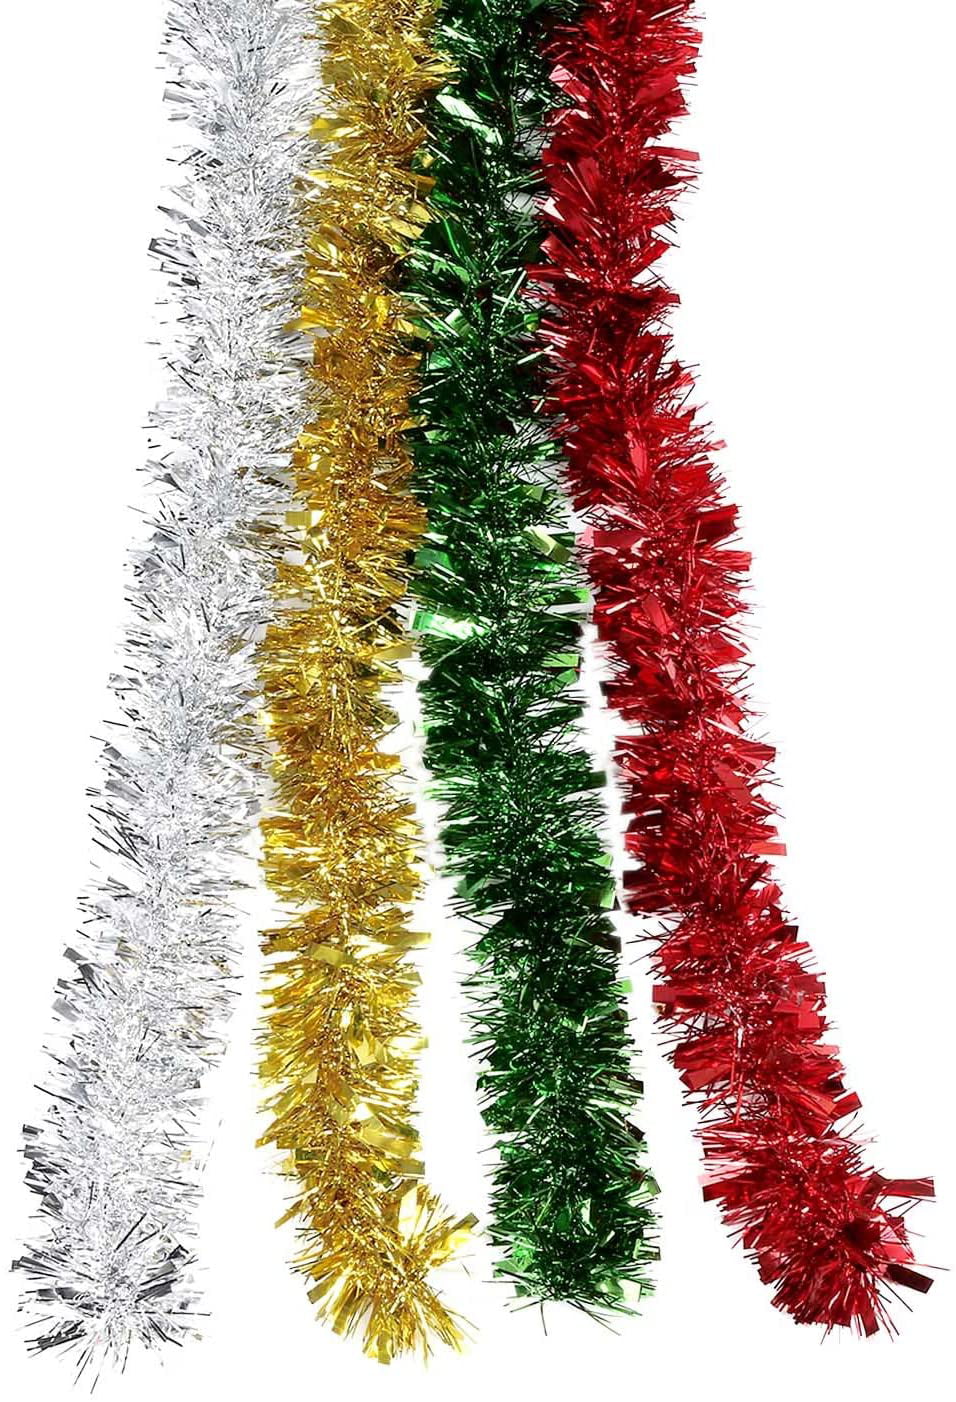 4 Pieces Christmas Tinsel Shiny Tinsel Garland for Holiday Decoration